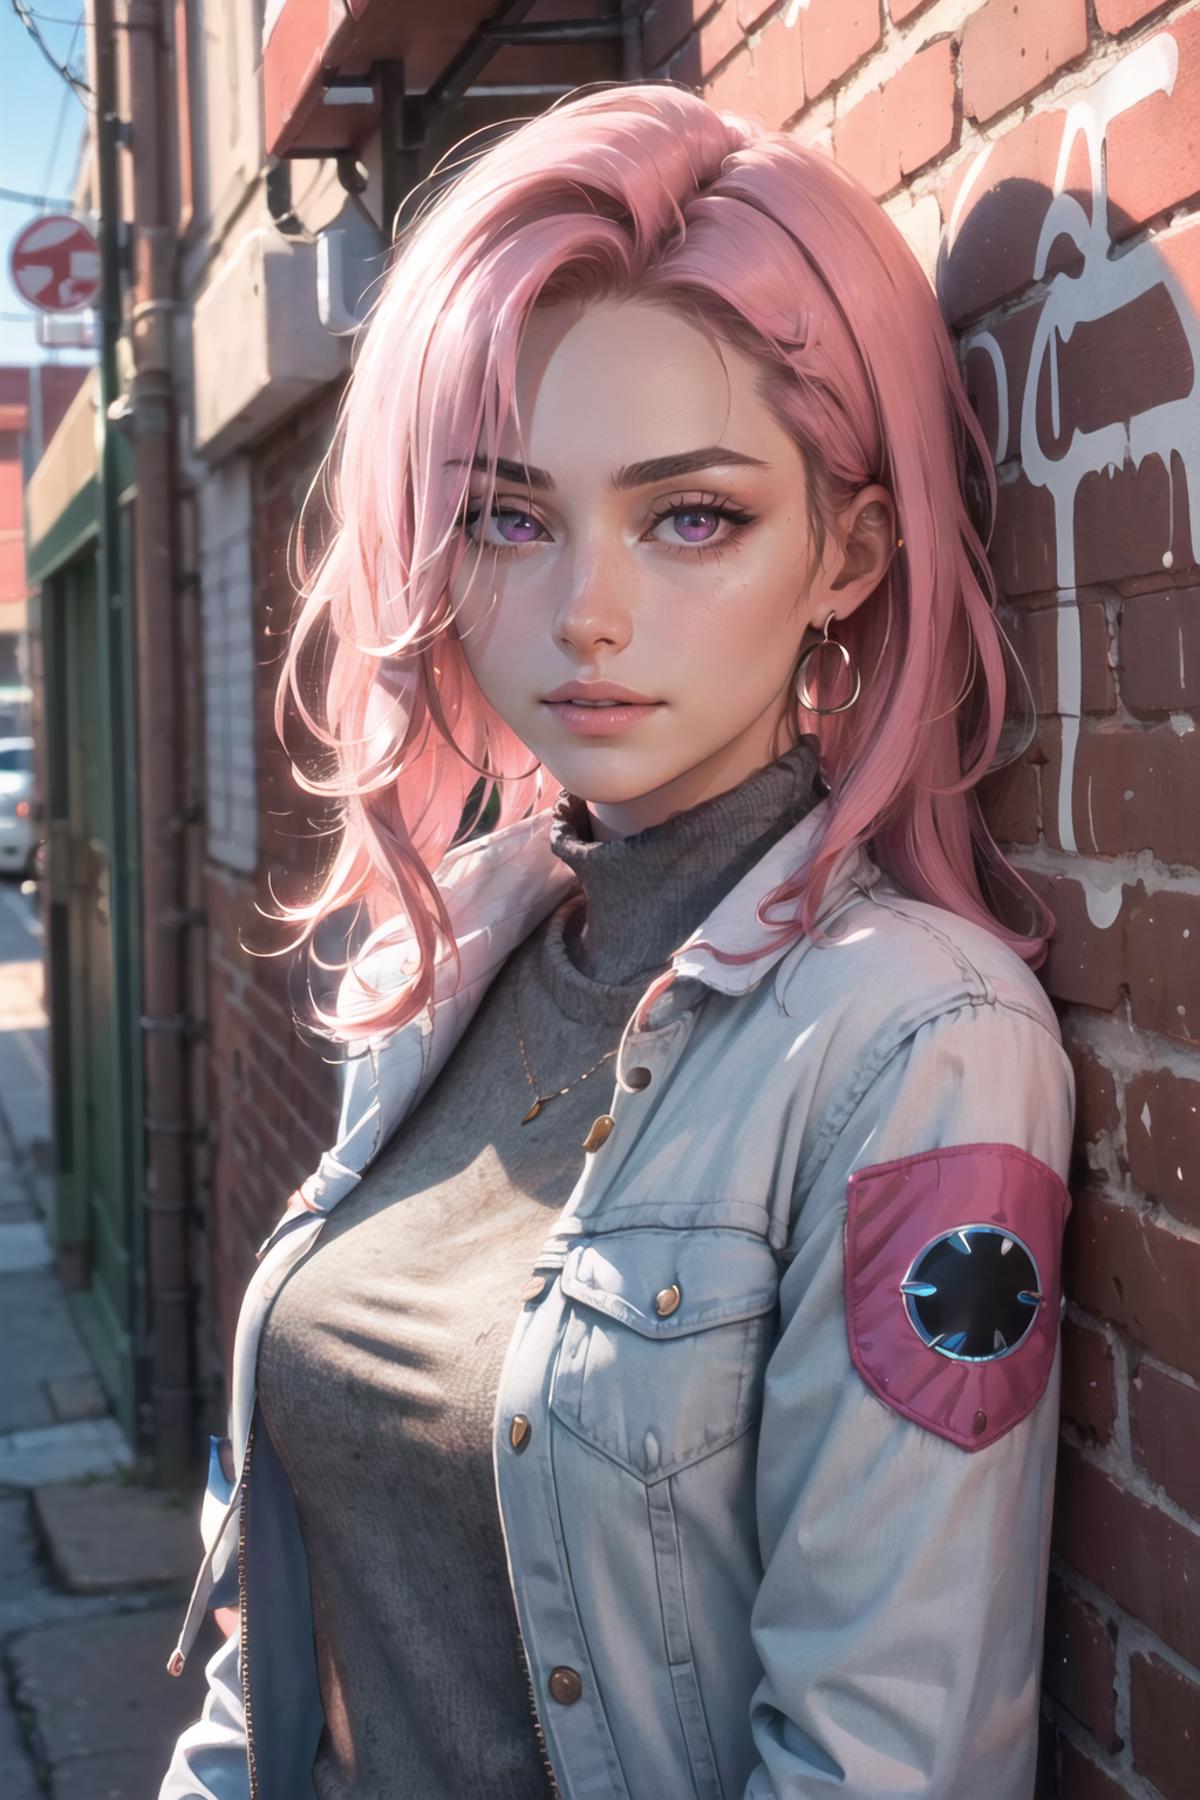 Pink-haired woman in a denim jacket with a black patch on the sleeve.